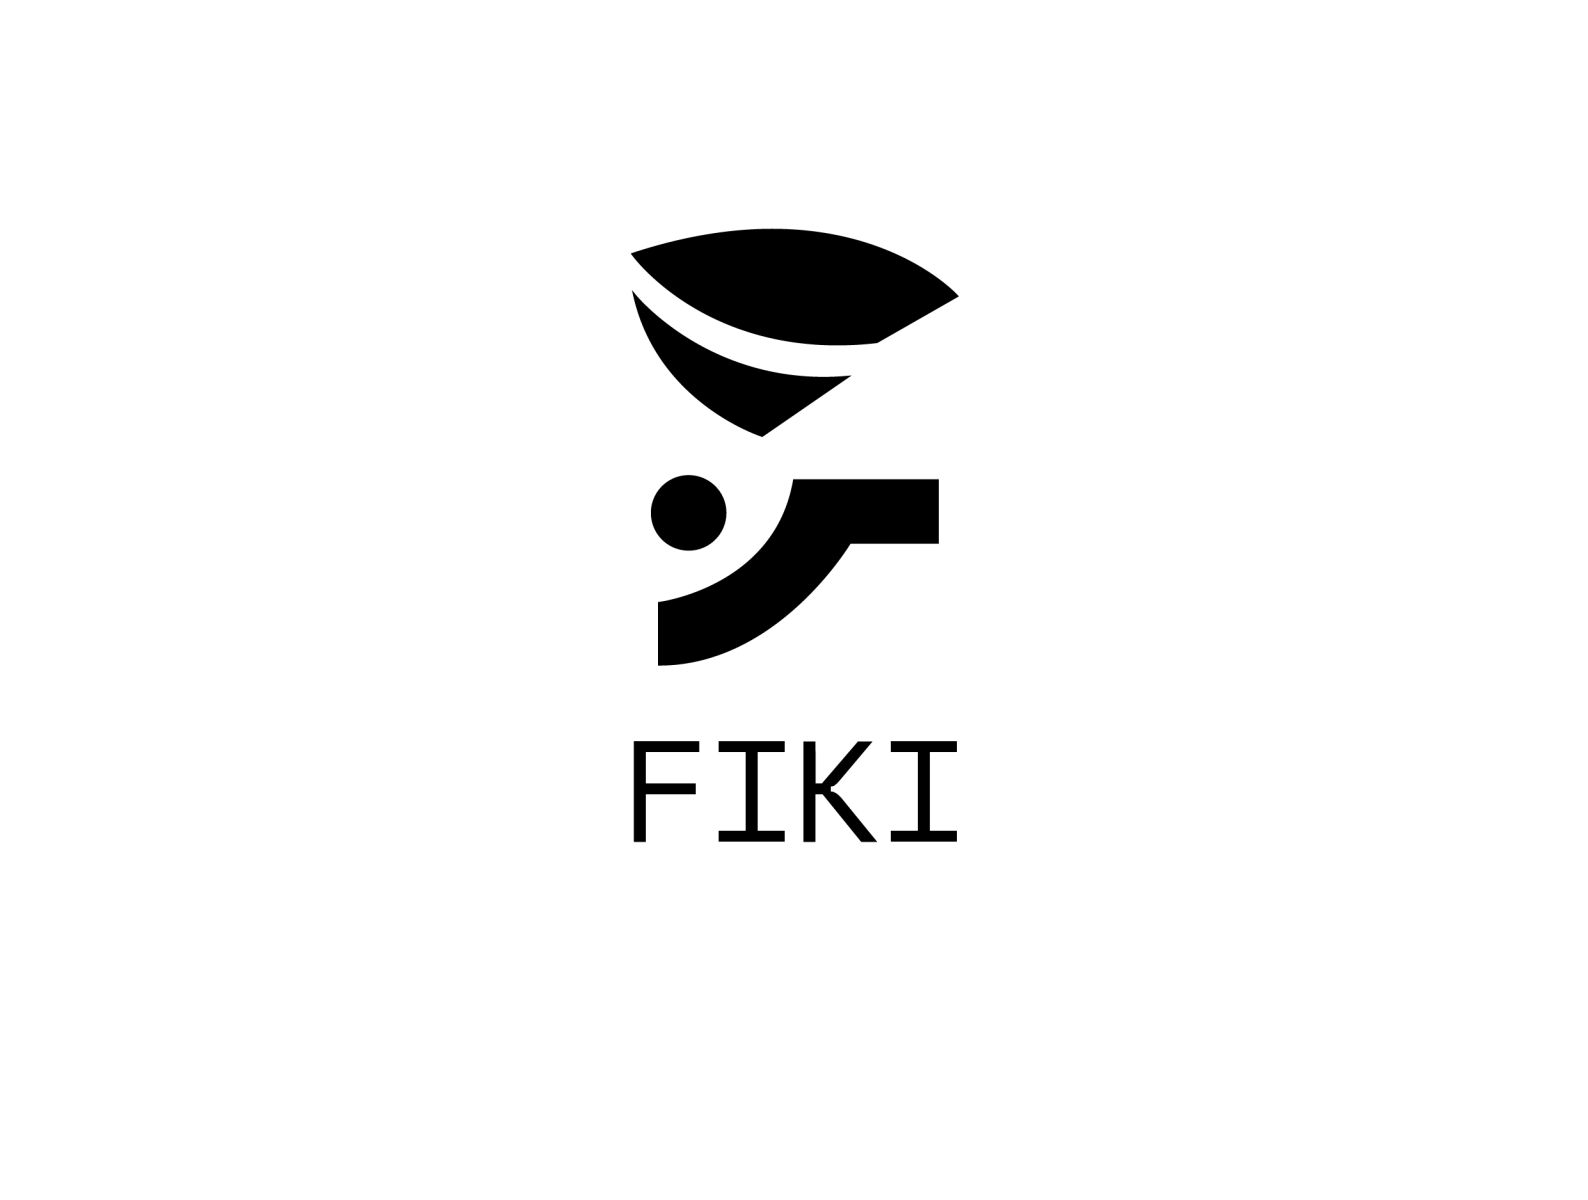 FIKI by Mark Angwenyi on Dribbble